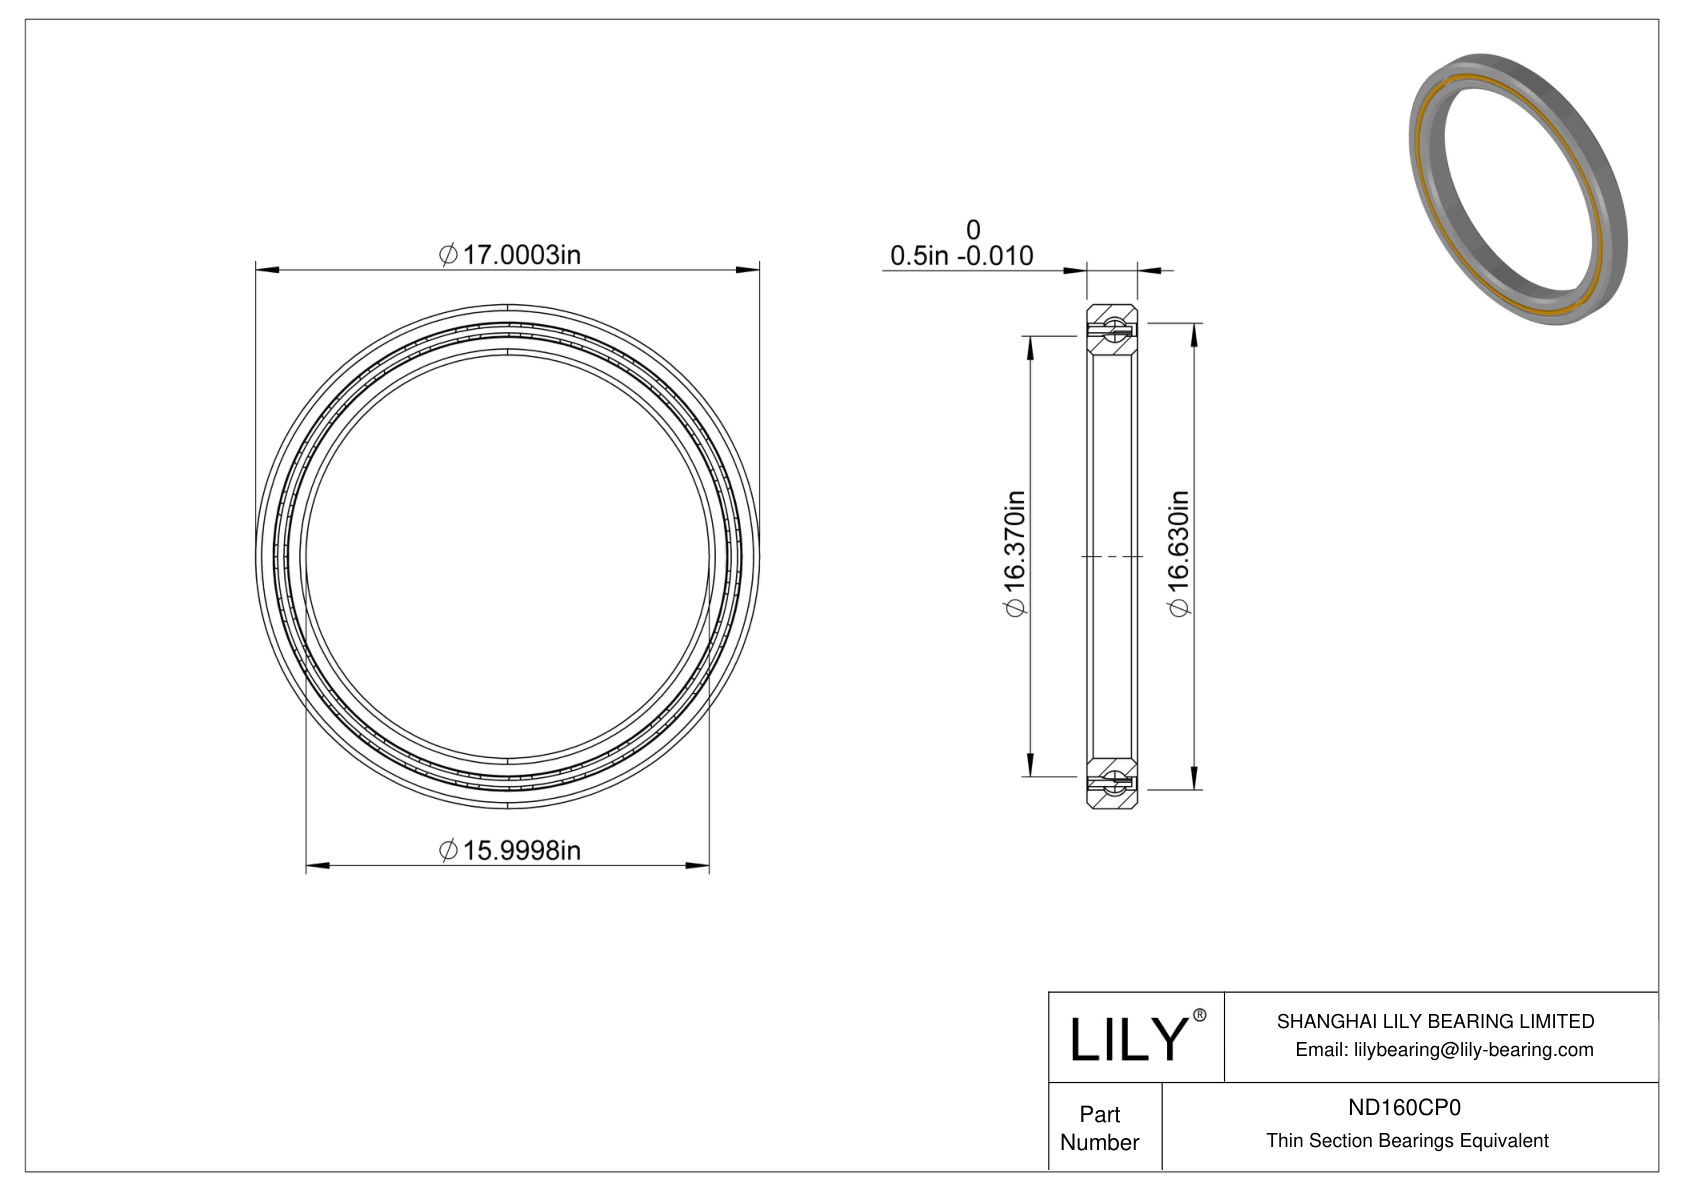 ND160CP0 Constant Section (CS) Bearings cad drawing